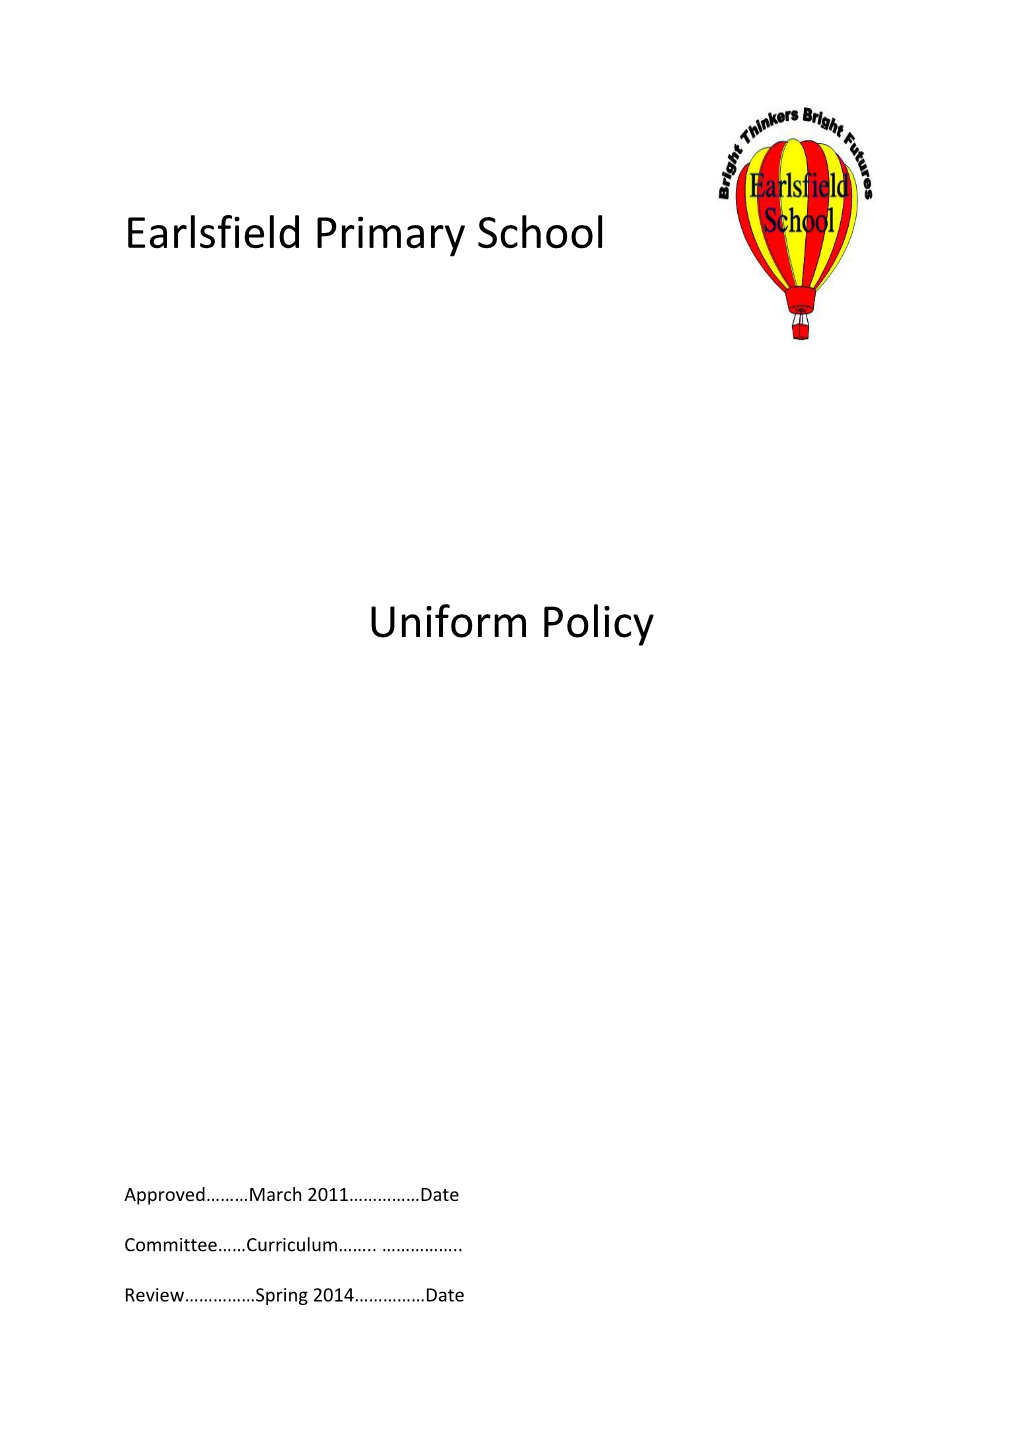 Draft Content of School Race Equality Policy